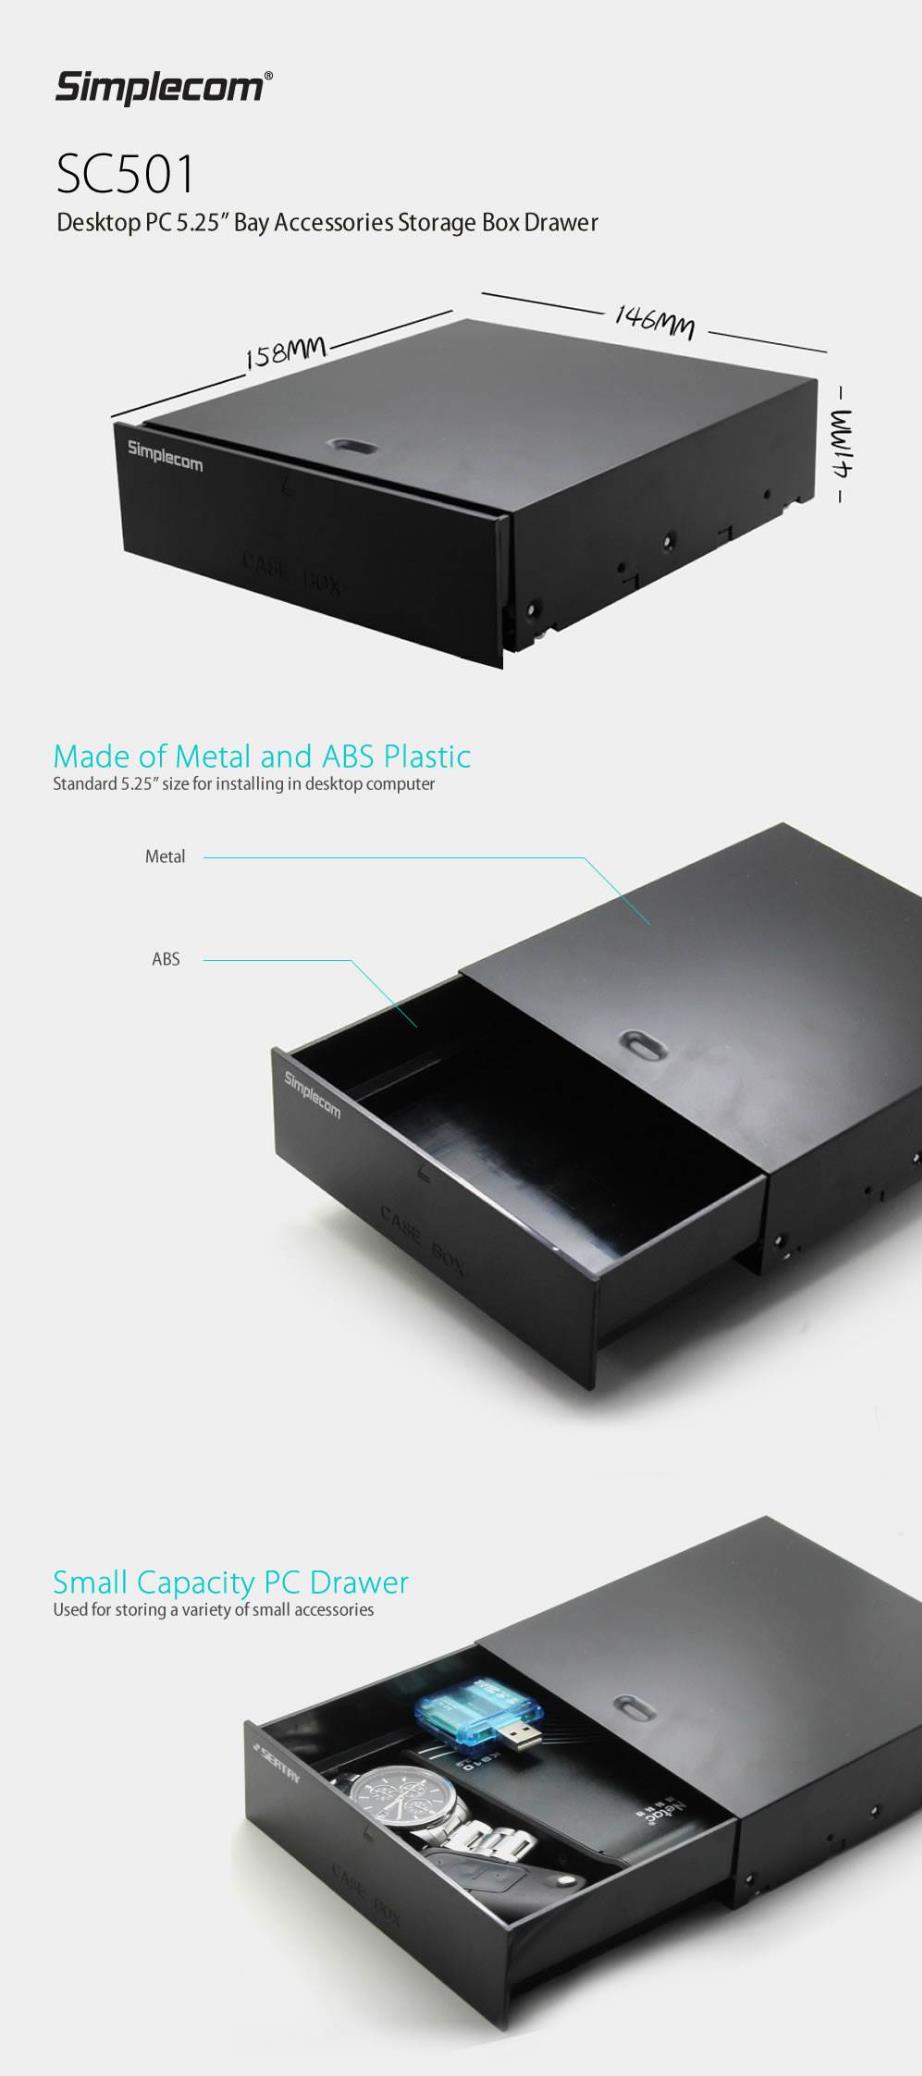 A large marketing image providing additional information about the product Simplecom SC5015.25" Desktop Bay Storage  - Additional alt info not provided